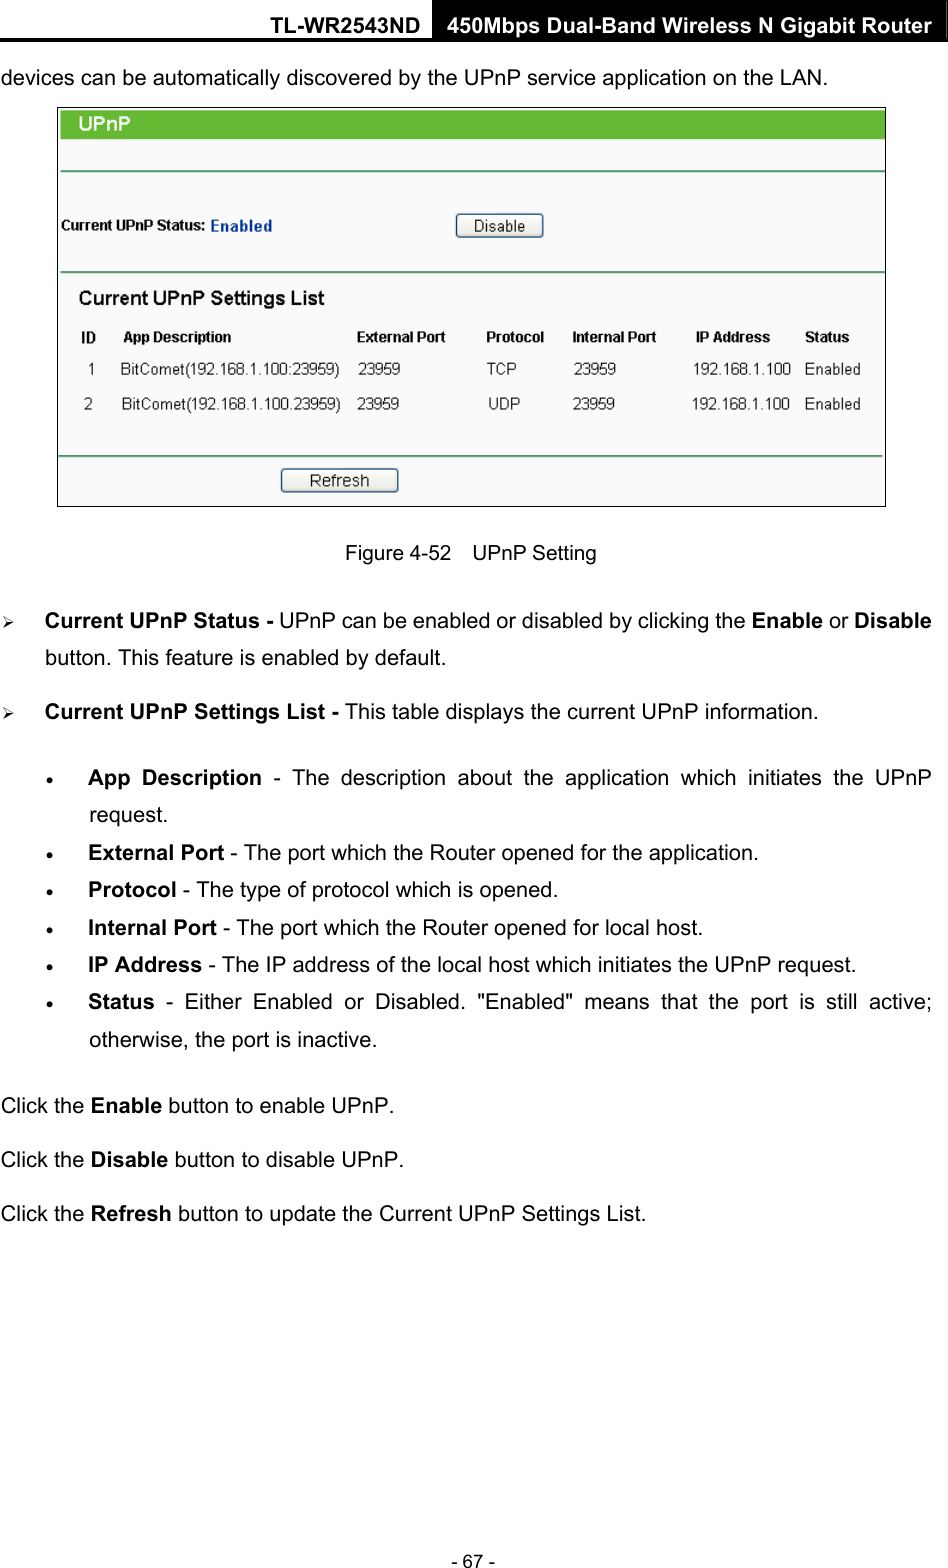 TL-WR2543ND 450Mbps Dual-Band Wireless N Gigabit Router - 67 - devices can be automatically discovered by the UPnP service application on the LAN.  Figure 4-52  UPnP Setting ¾ Current UPnP Status - UPnP can be enabled or disabled by clicking the Enable or Disable button. This feature is enabled by default. ¾ Current UPnP Settings List - This table displays the current UPnP information. • App Description - The description about the application which initiates the UPnP request.  • External Port - The port which the Router opened for the application.   • Protocol - The type of protocol which is opened.   • Internal Port - The port which the Router opened for local host.   • IP Address - The IP address of the local host which initiates the UPnP request.   • Status - Either Enabled or Disabled. &quot;Enabled&quot; means that the port is still active; otherwise, the port is inactive.   Click the Enable button to enable UPnP. Click the Disable button to disable UPnP. Click the Refresh button to update the Current UPnP Settings List. 